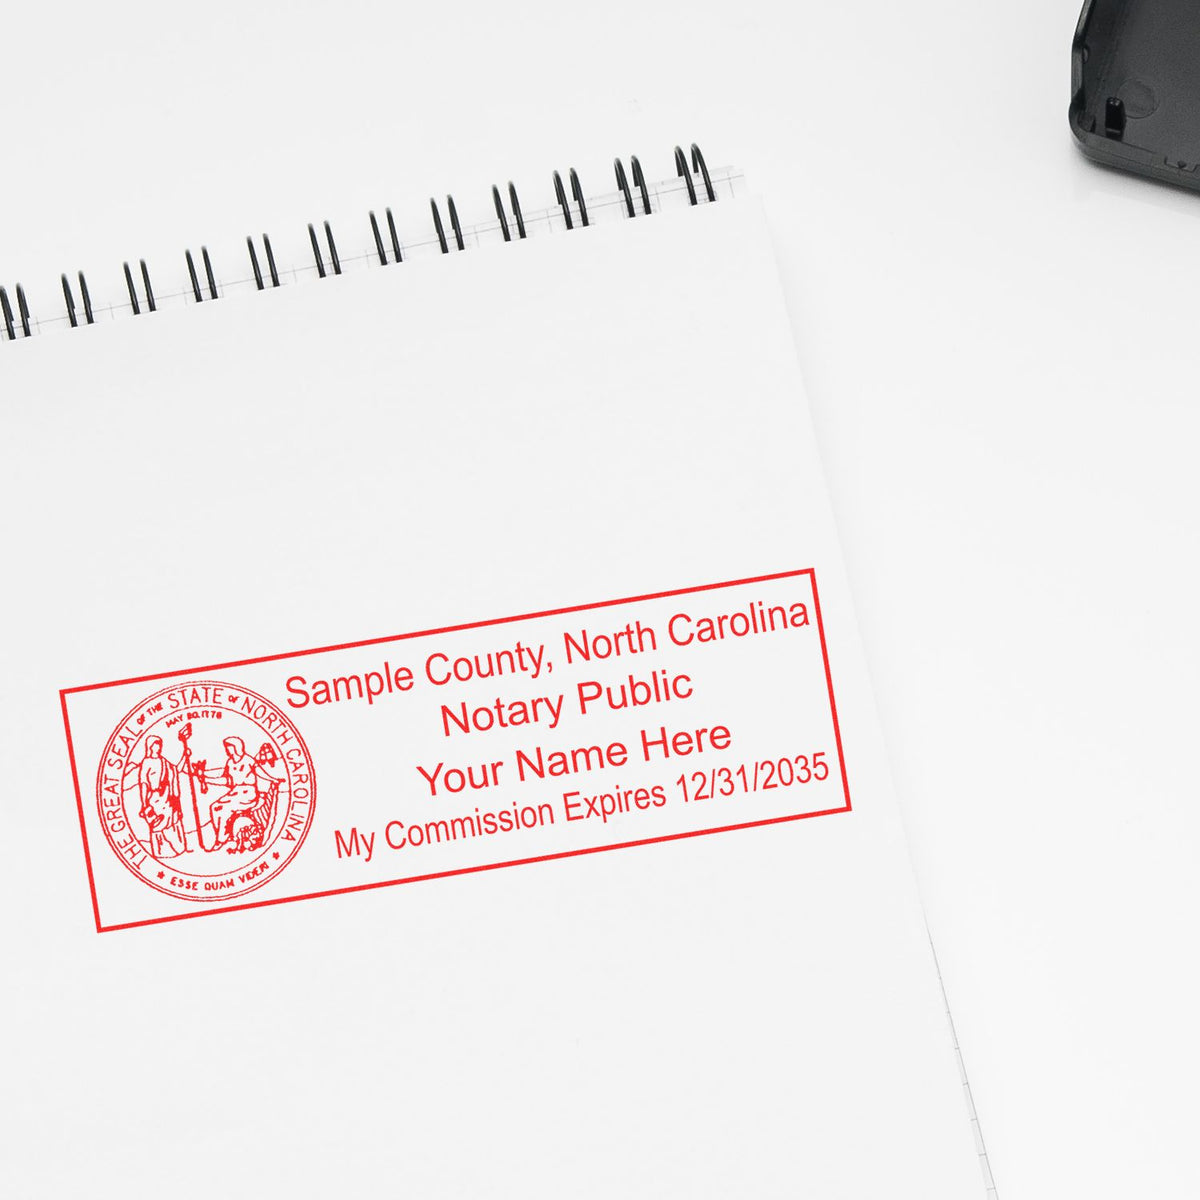 A stamped impression of the PSI North Carolina Notary Stamp in this stylish lifestyle photo, setting the tone for a unique and personalized product.